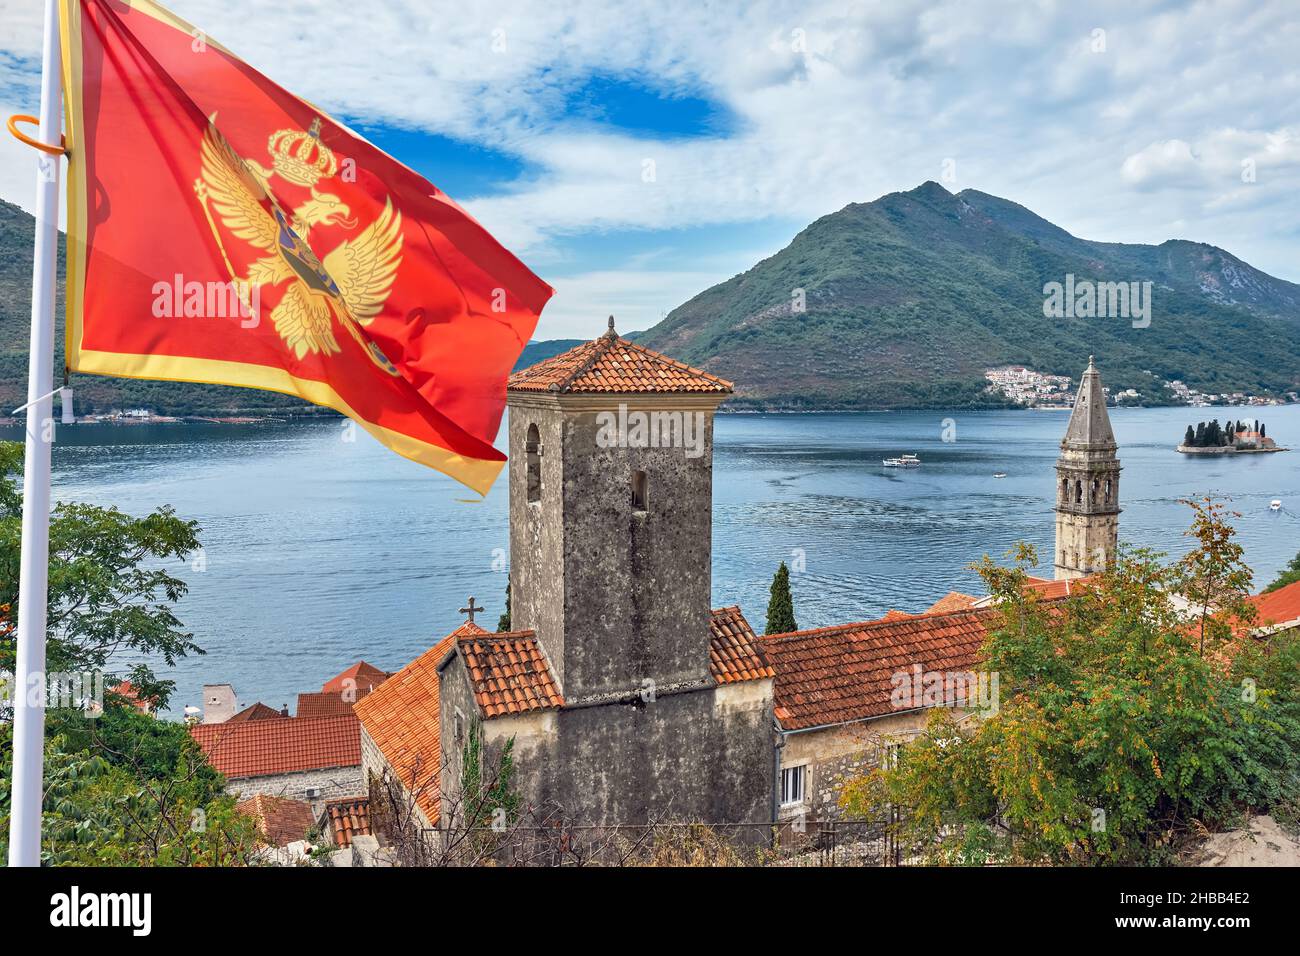 View of Church of St. Matthew in Dobrota, small town located on the coast between Kotor and Perast, with the Montenegro flag. Stock Photo